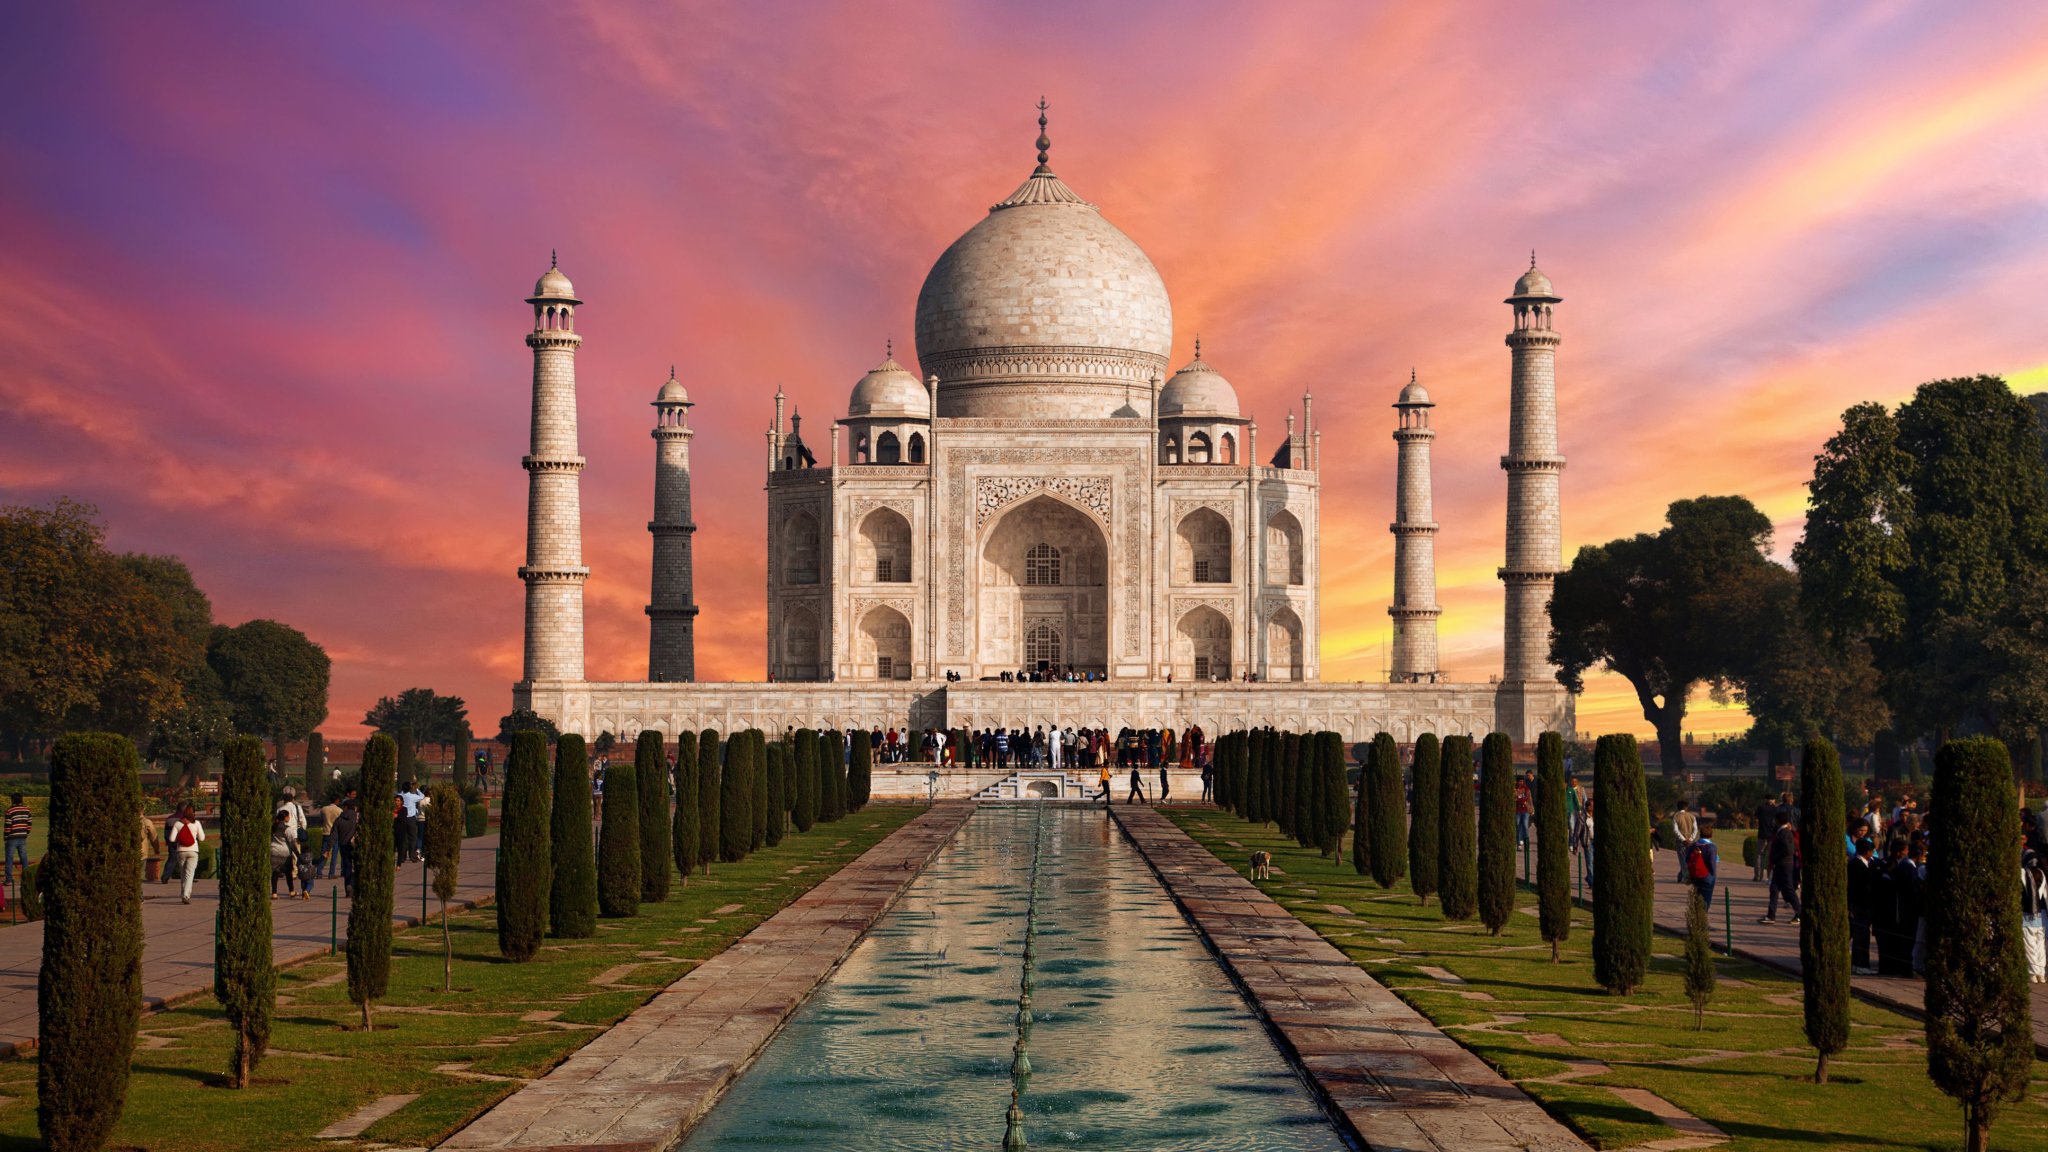 Fascinating Facts about the Taj Mahal You Might Not Know